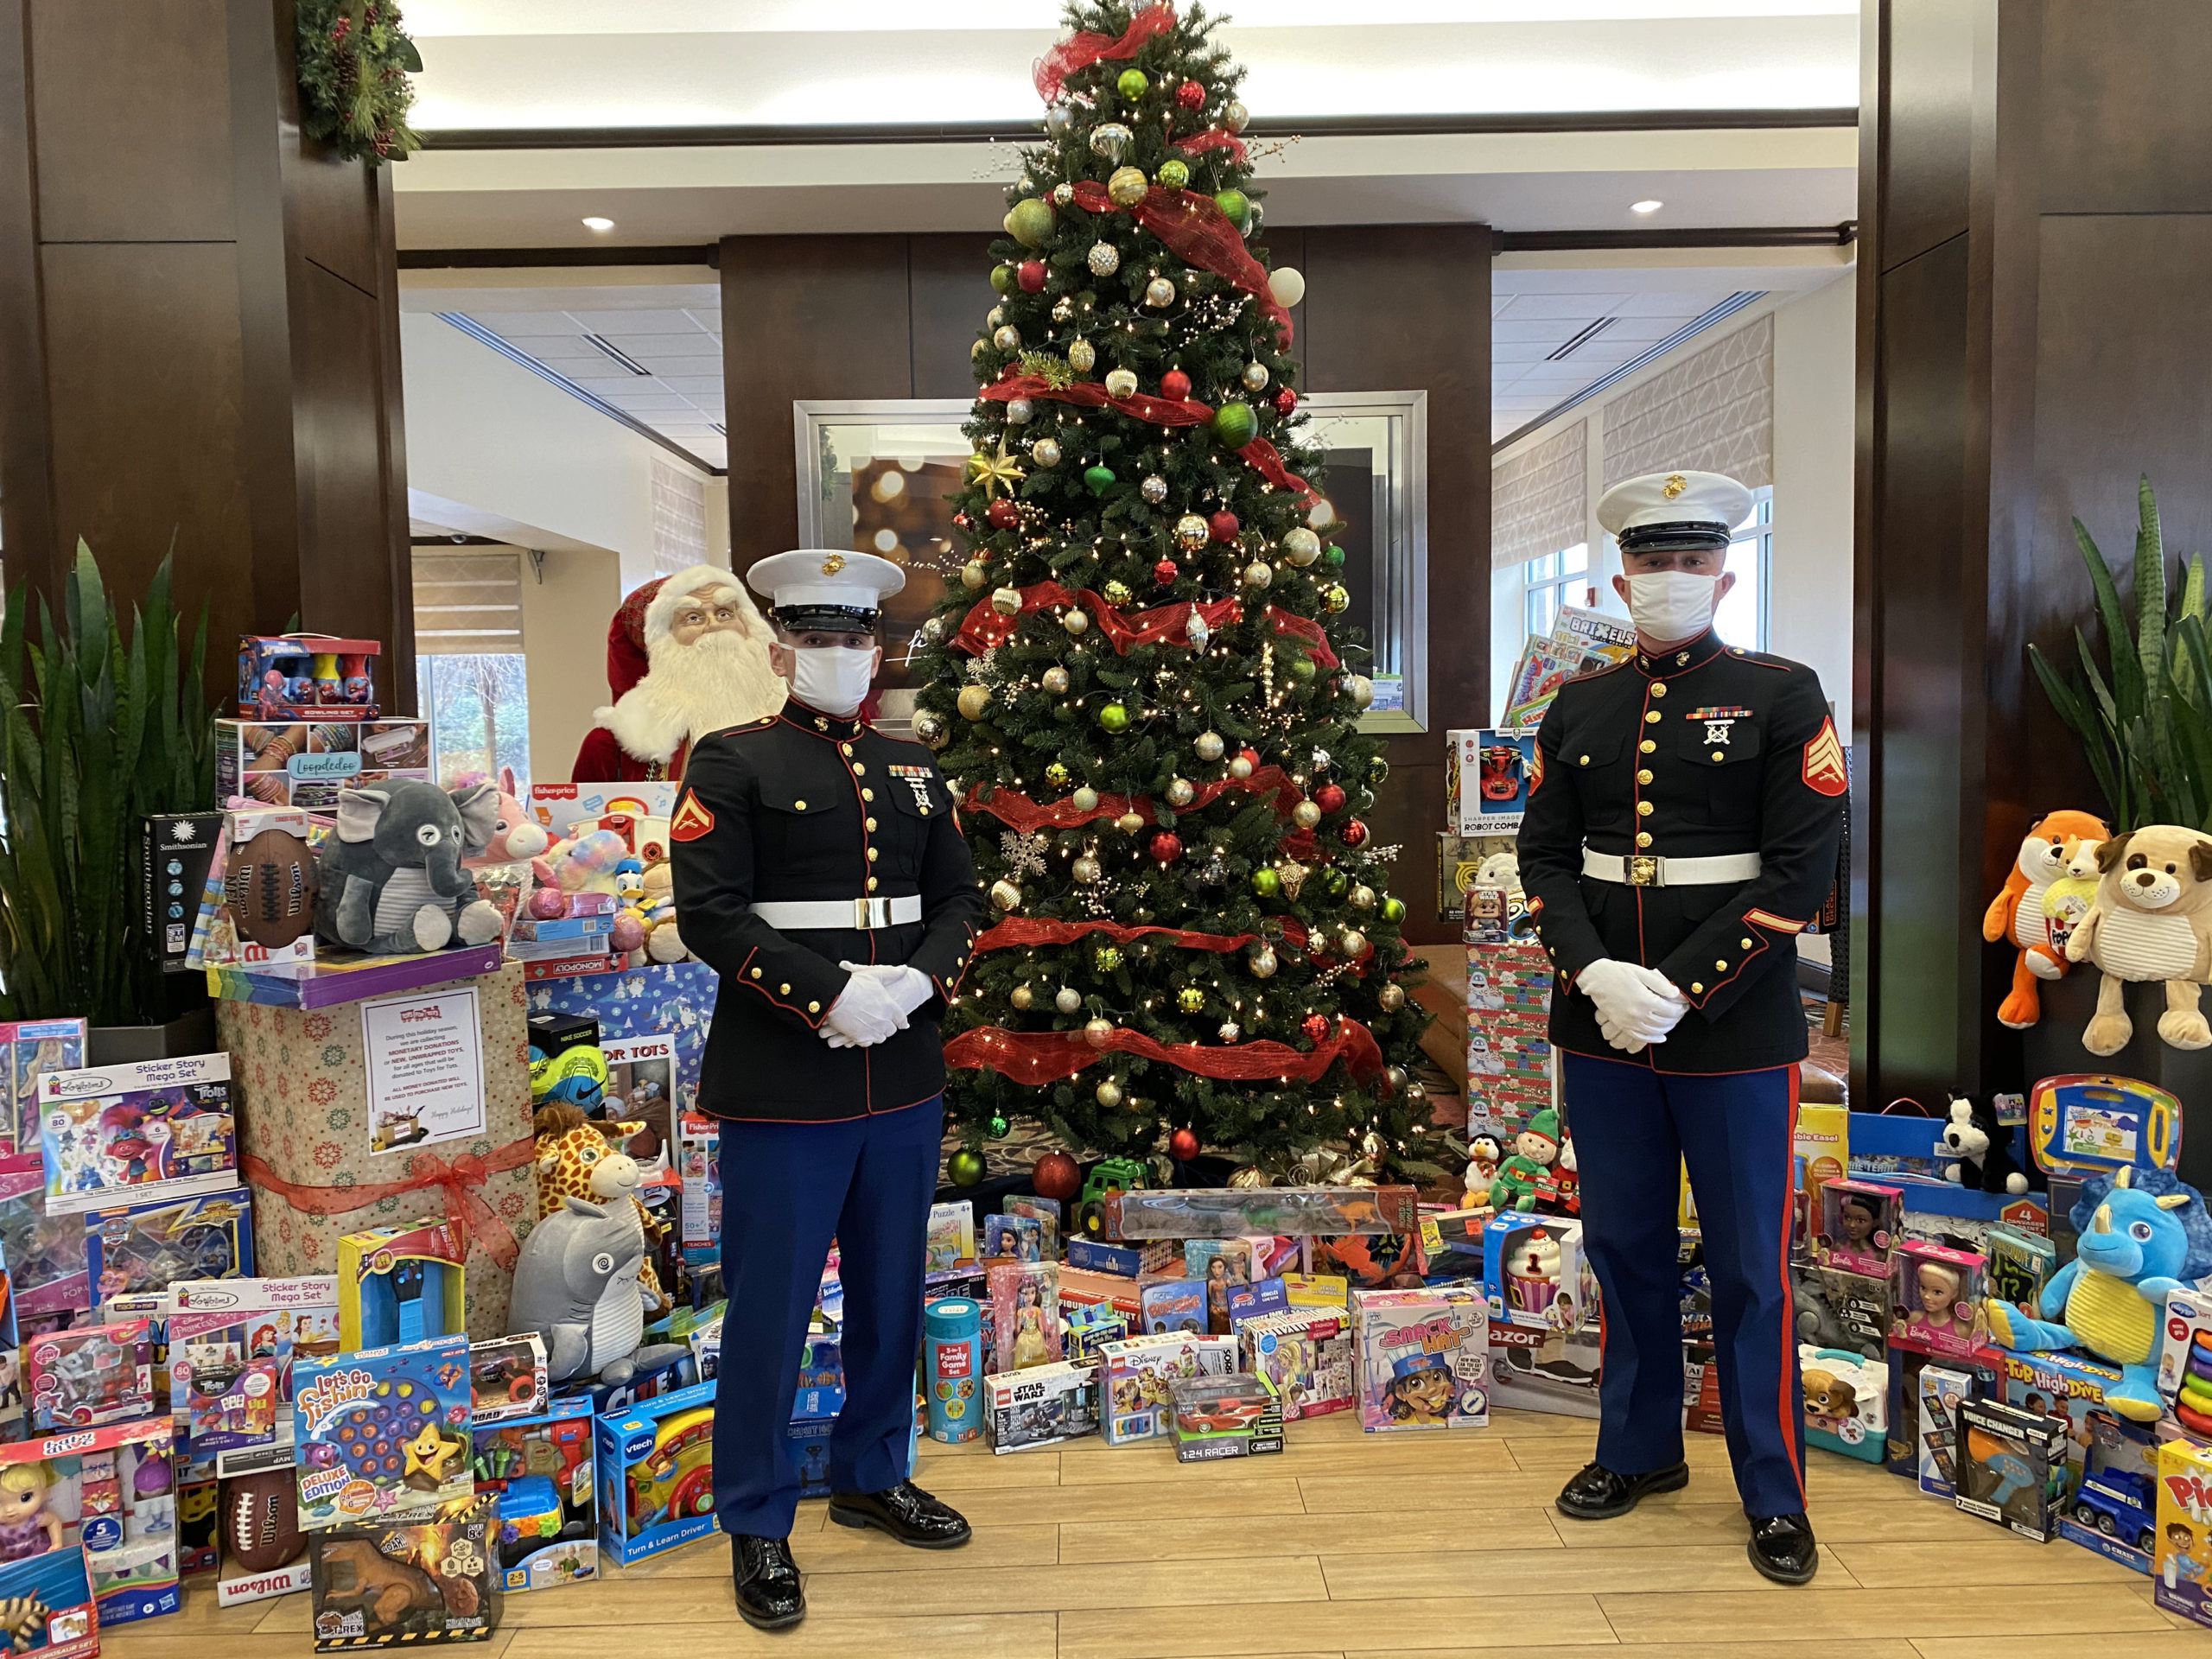 Marines in uniform standing in front of Christmas tree and gifts